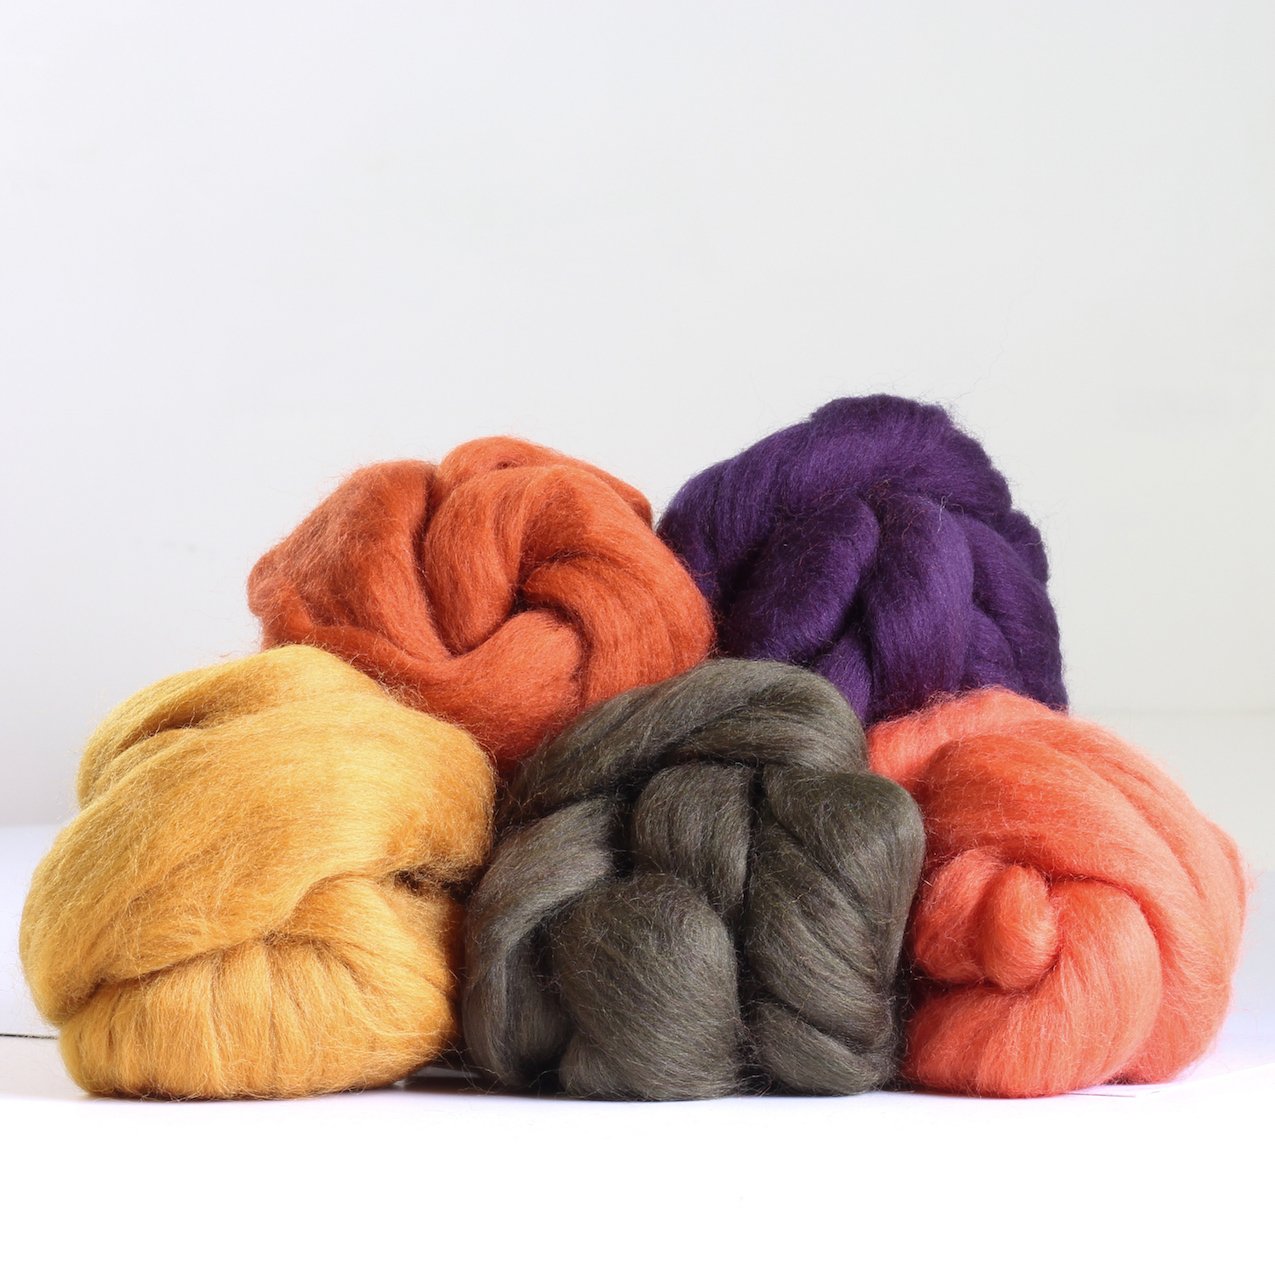 Autumn Wool Bundles piled up on a white background.